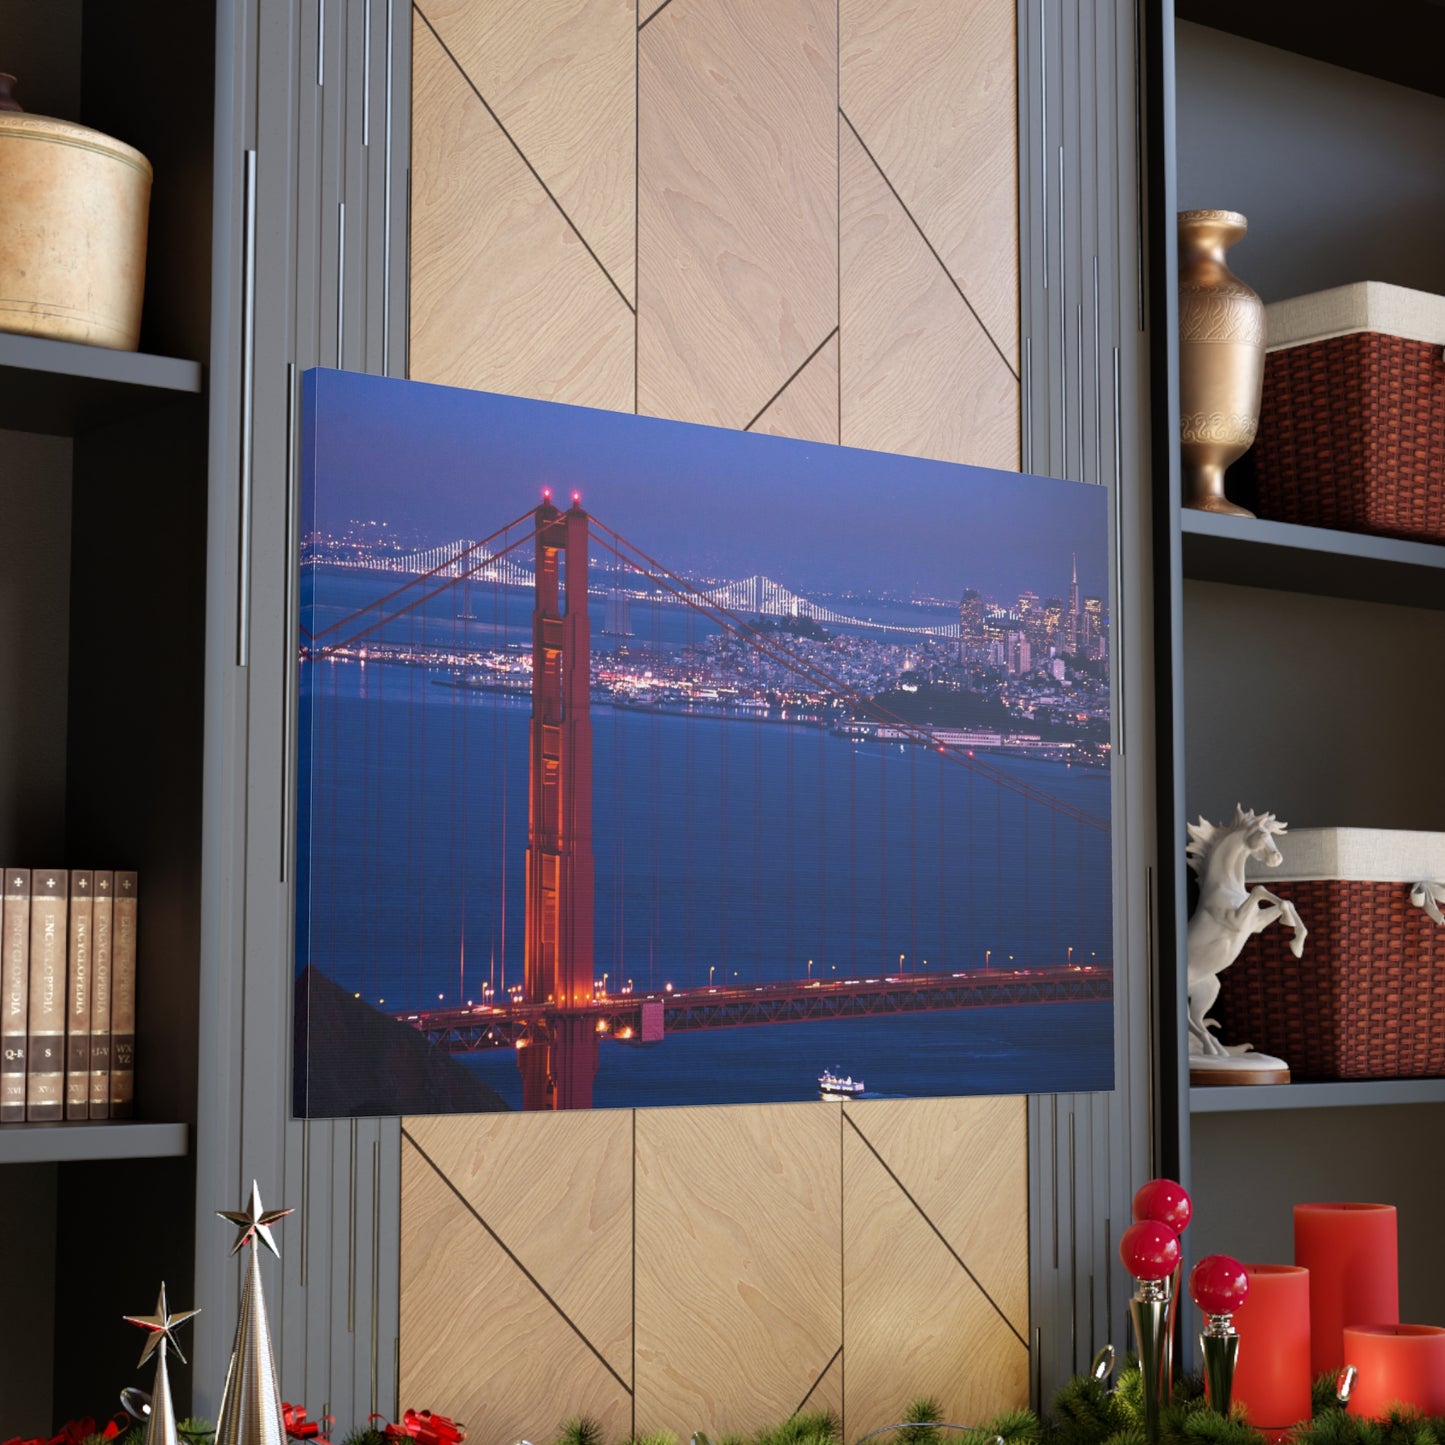 Canvas Print Of The Golden Gate Bridge In San Francisco At Dusk For Wall Art